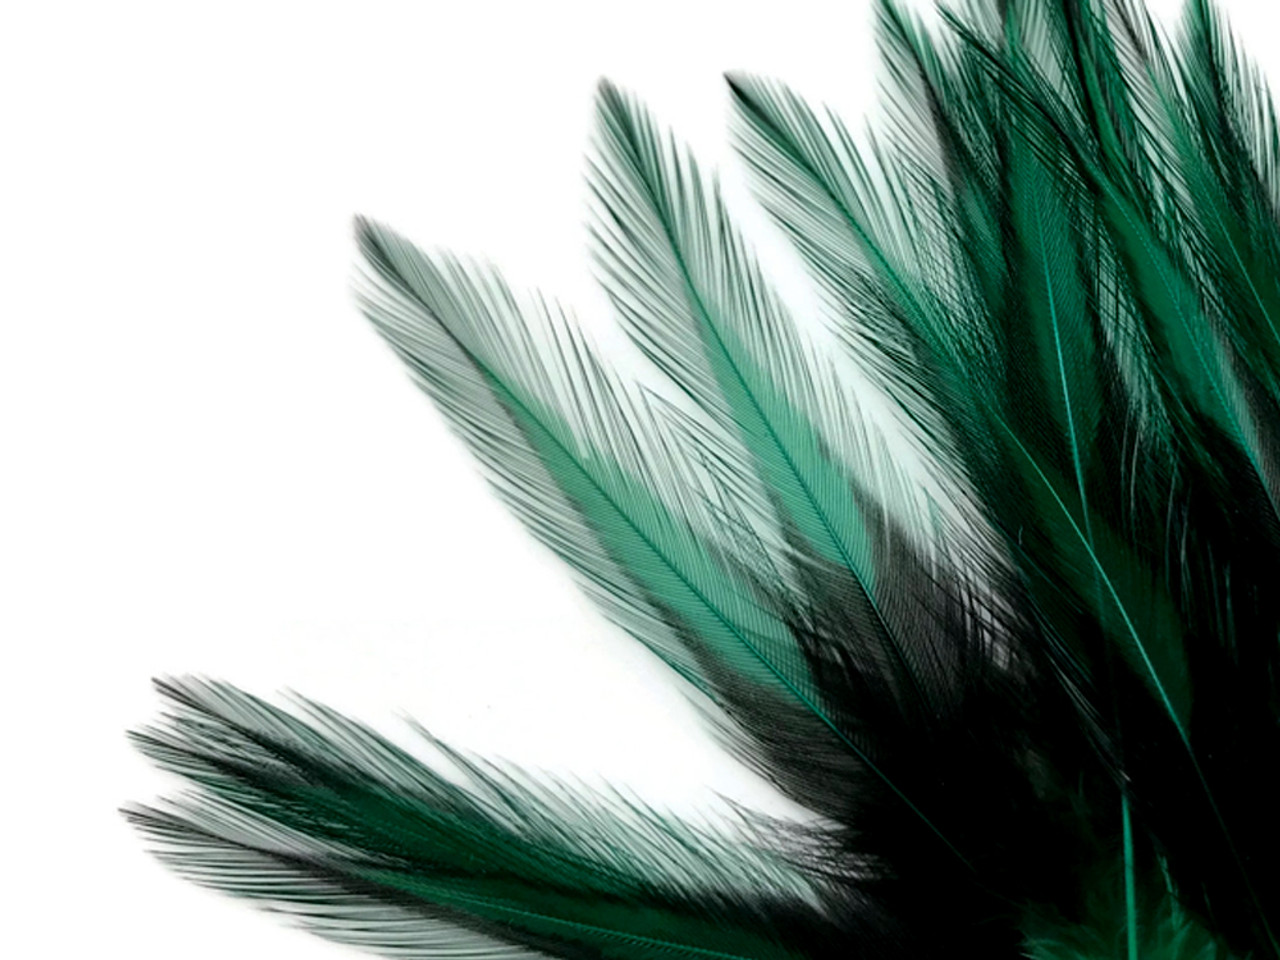 2-4 Inch Green Pheasant Feathers 10 Green Feathers. Green Peacock Feathers  for Fascinators. Green Mask Feathers for Crafts. Short Feathers -   Israel